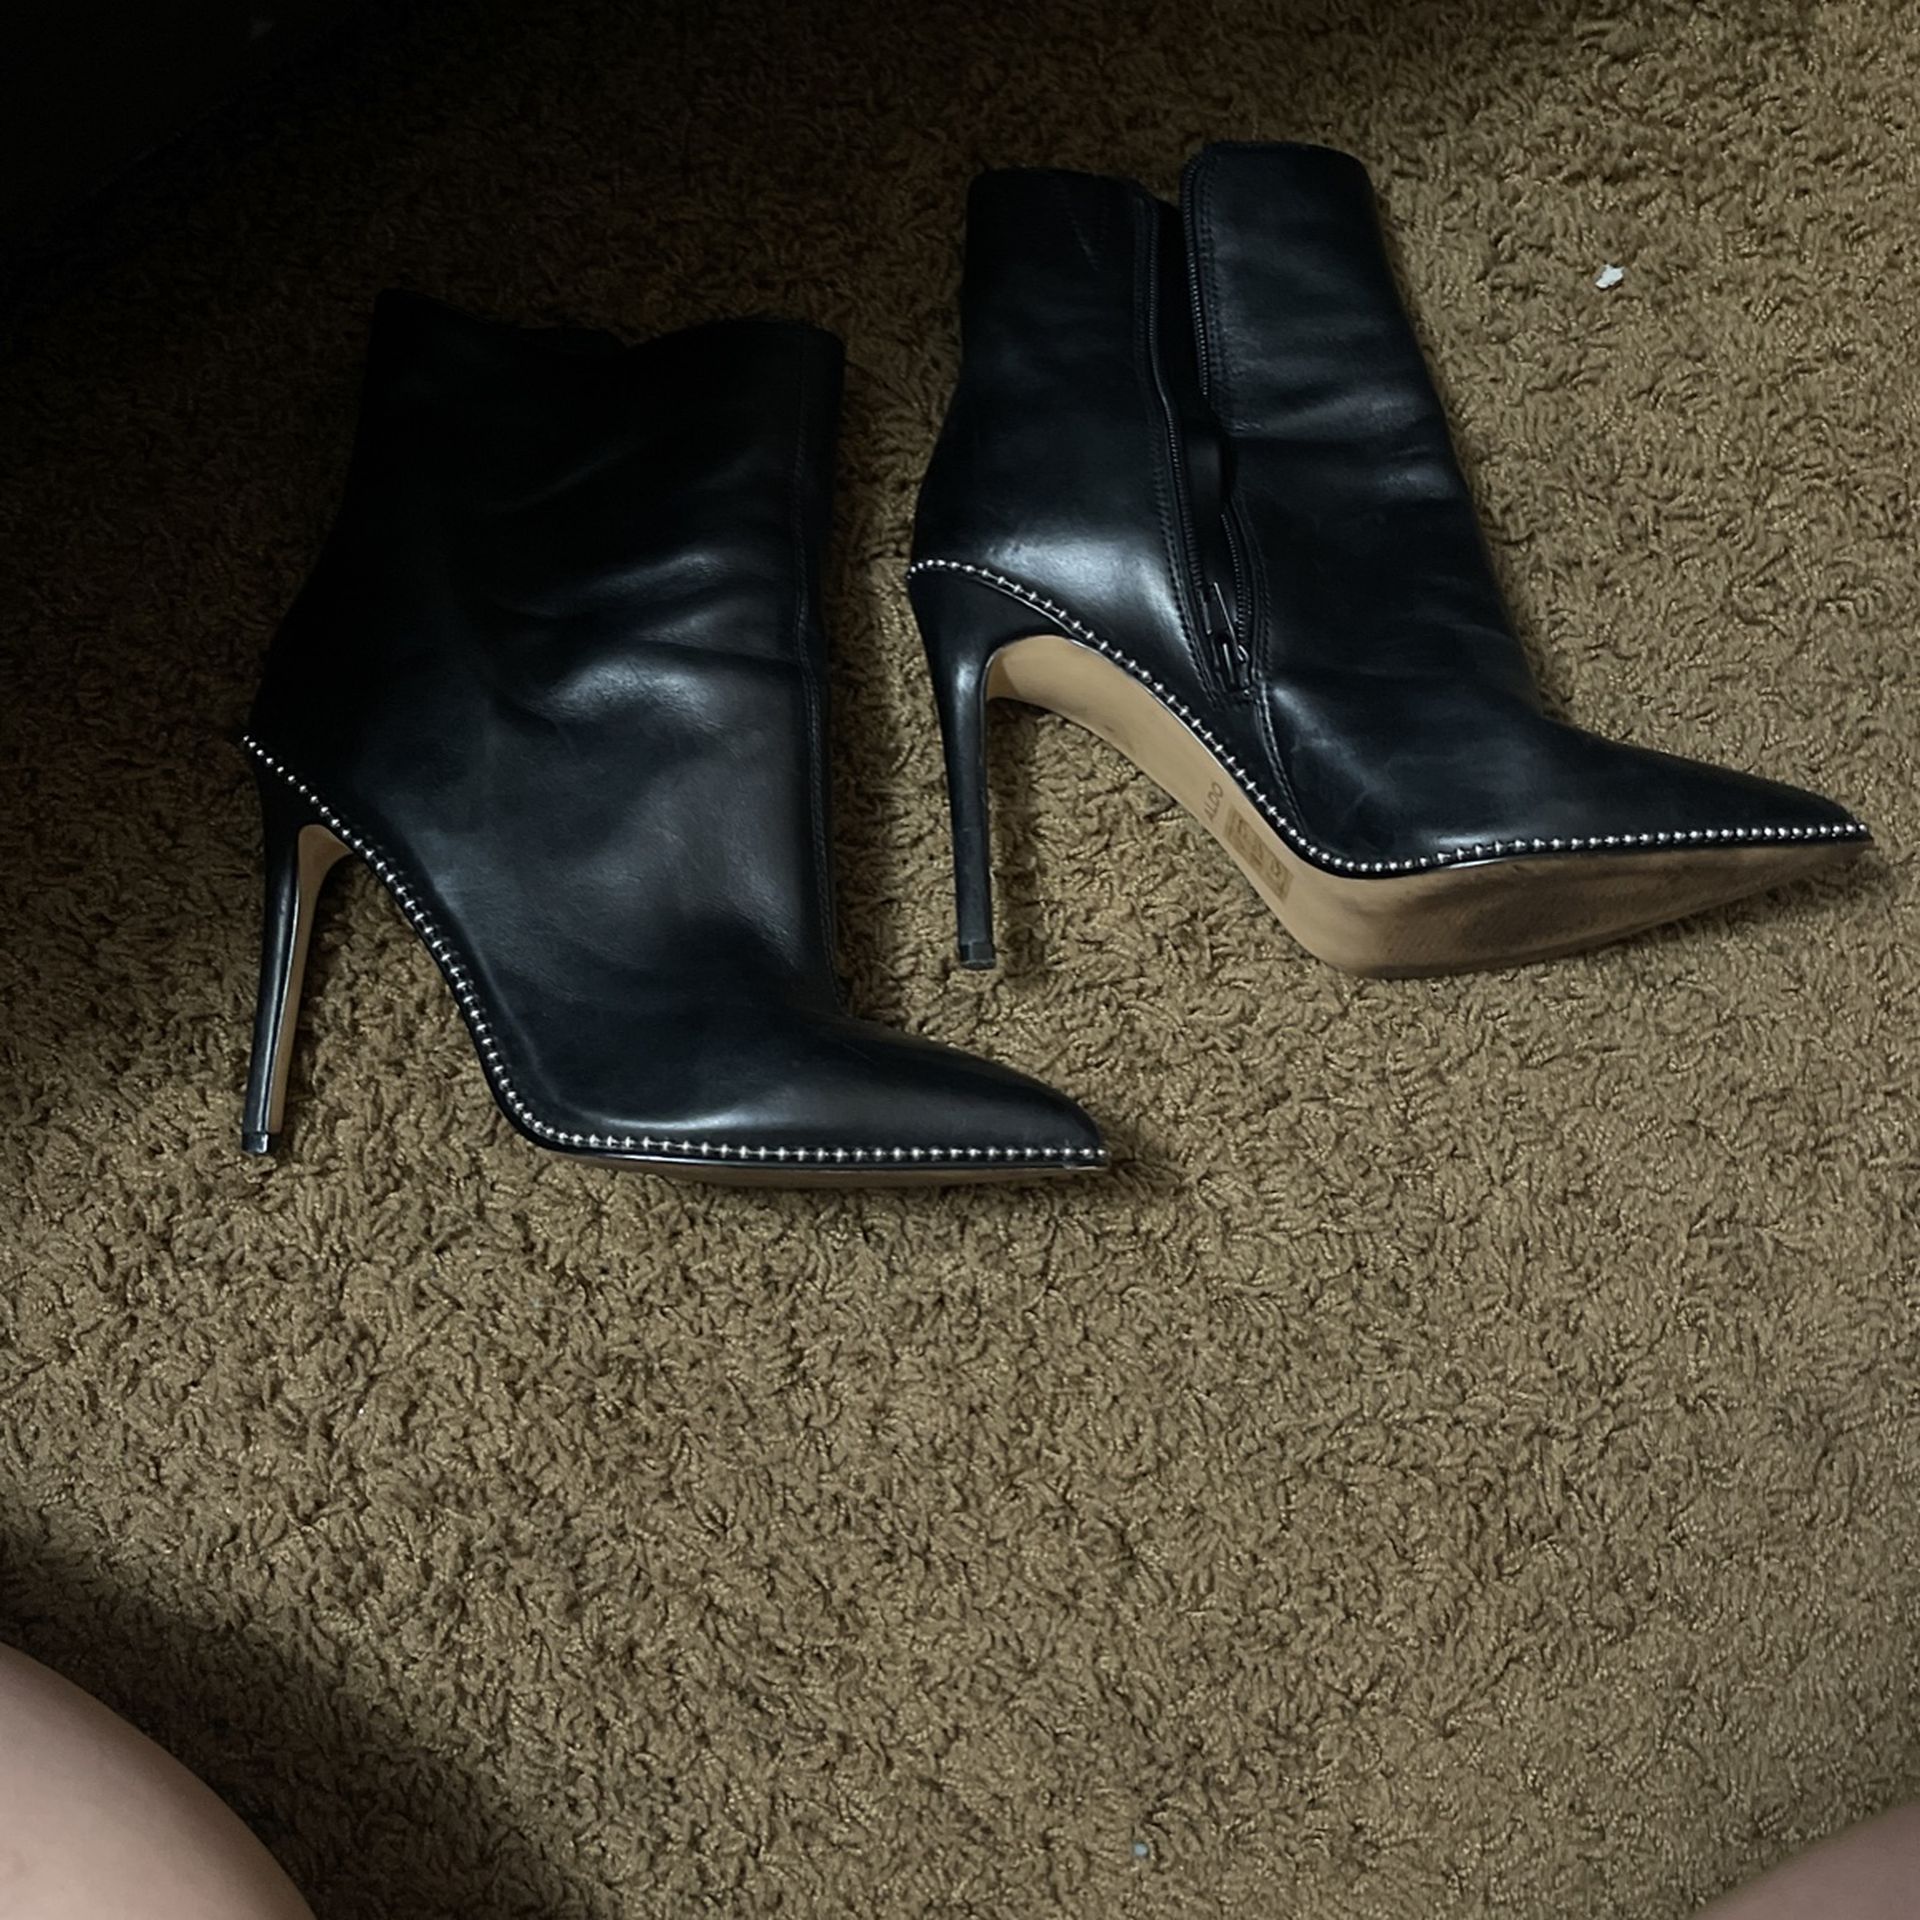 Black Leather Booties